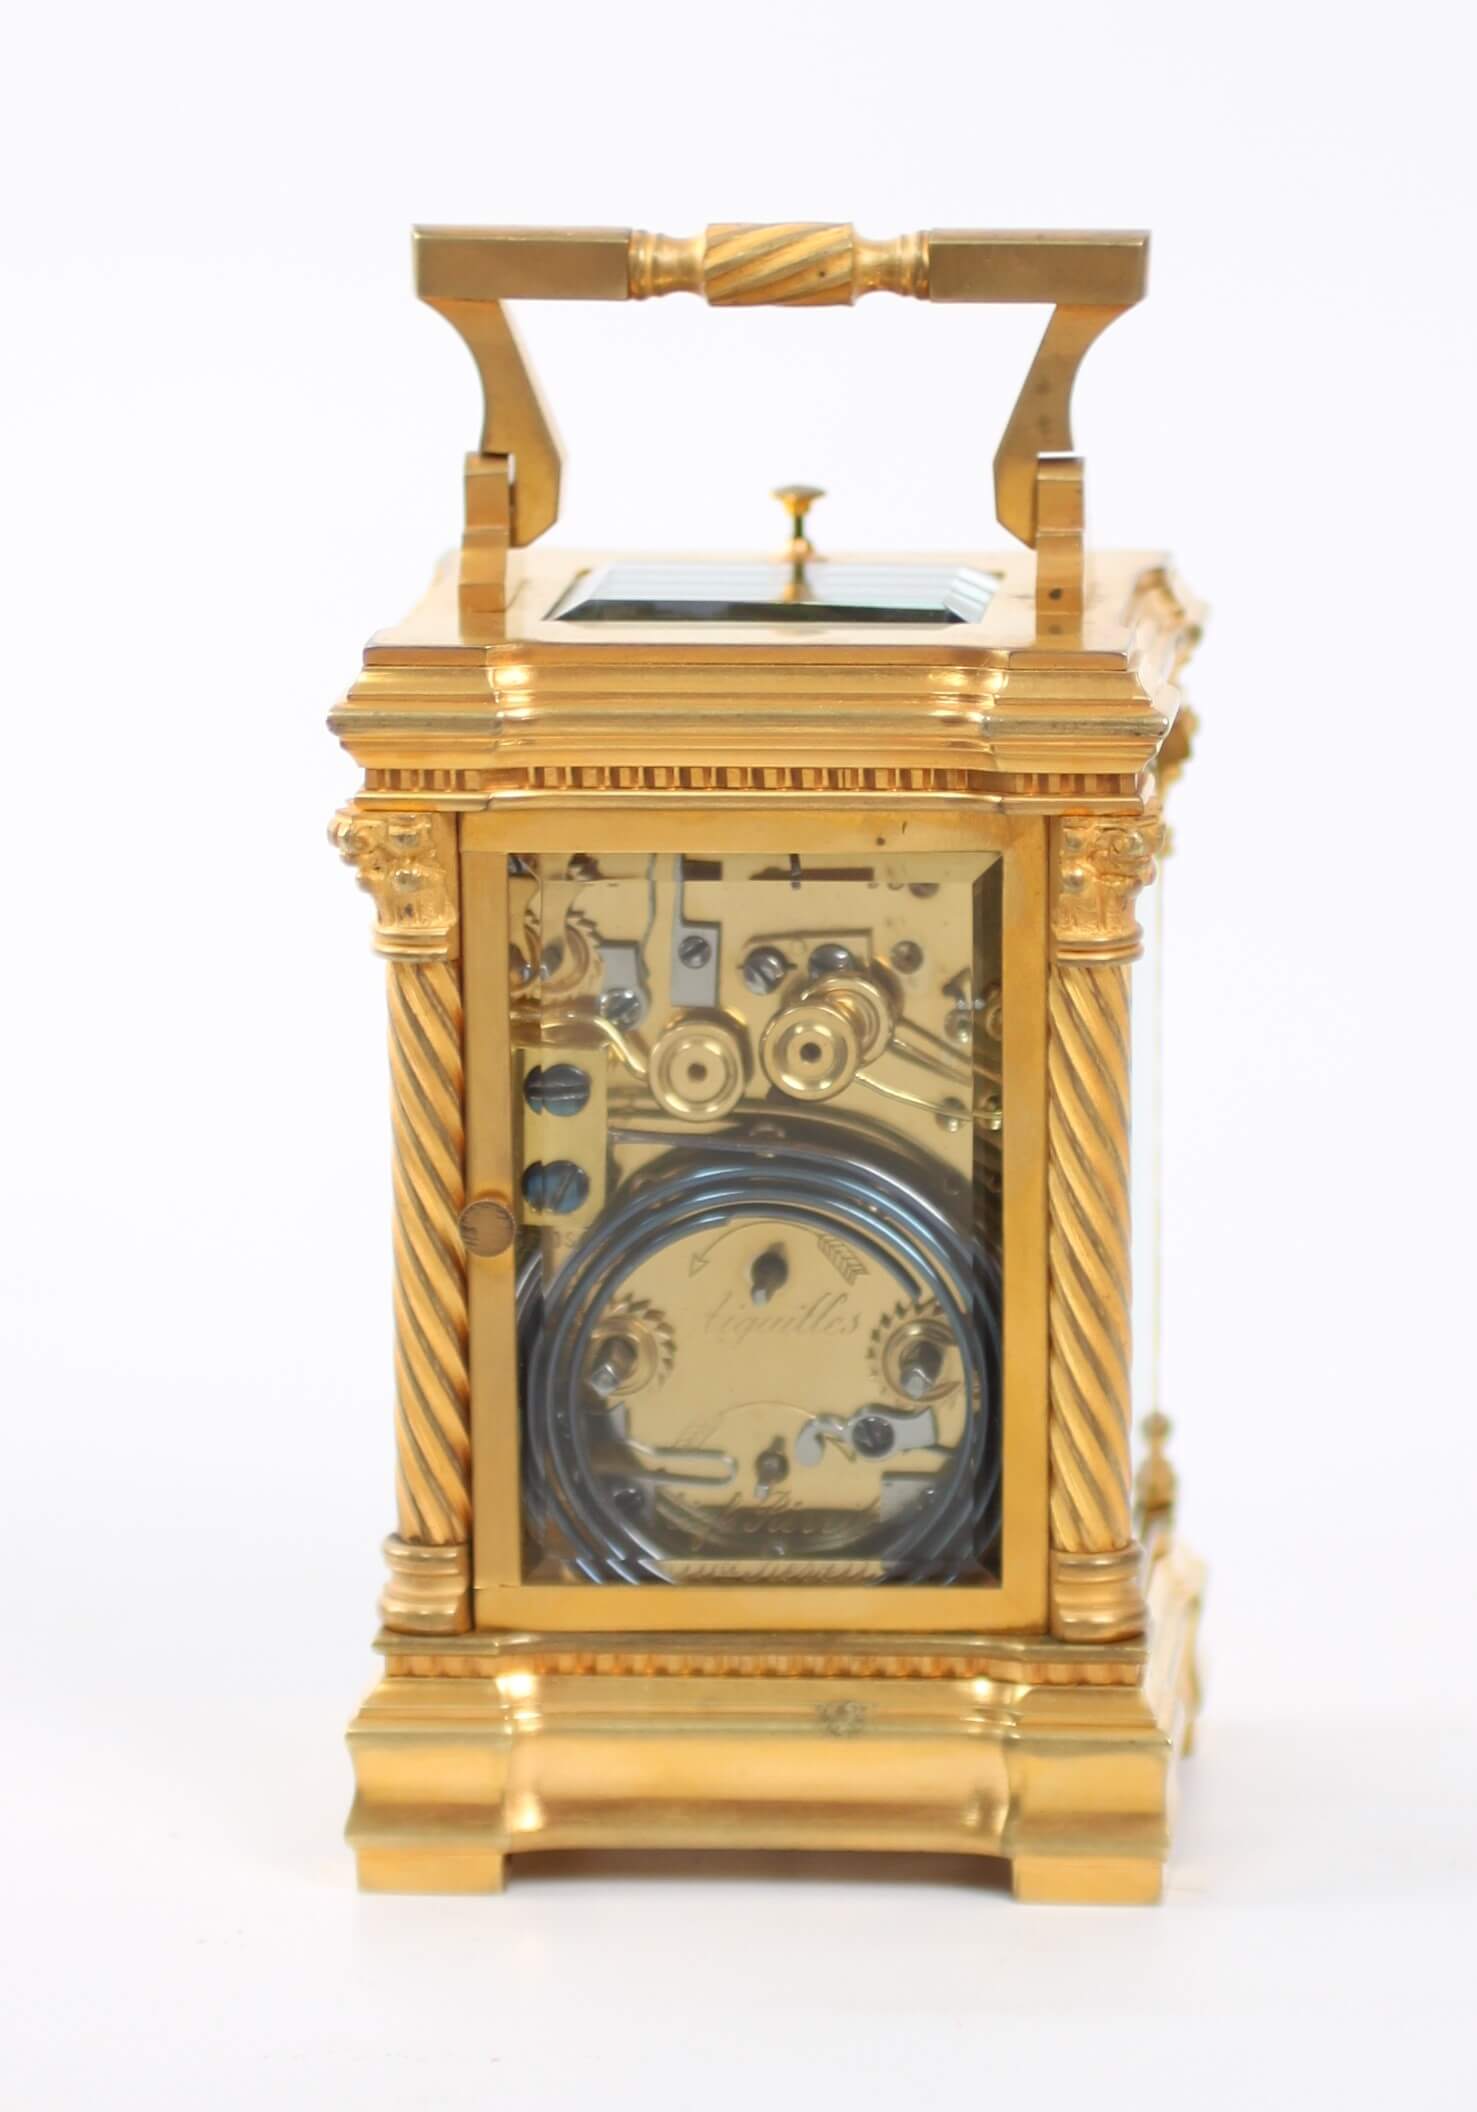 French antique clock carriage gilt bronze petite sonnerie travel